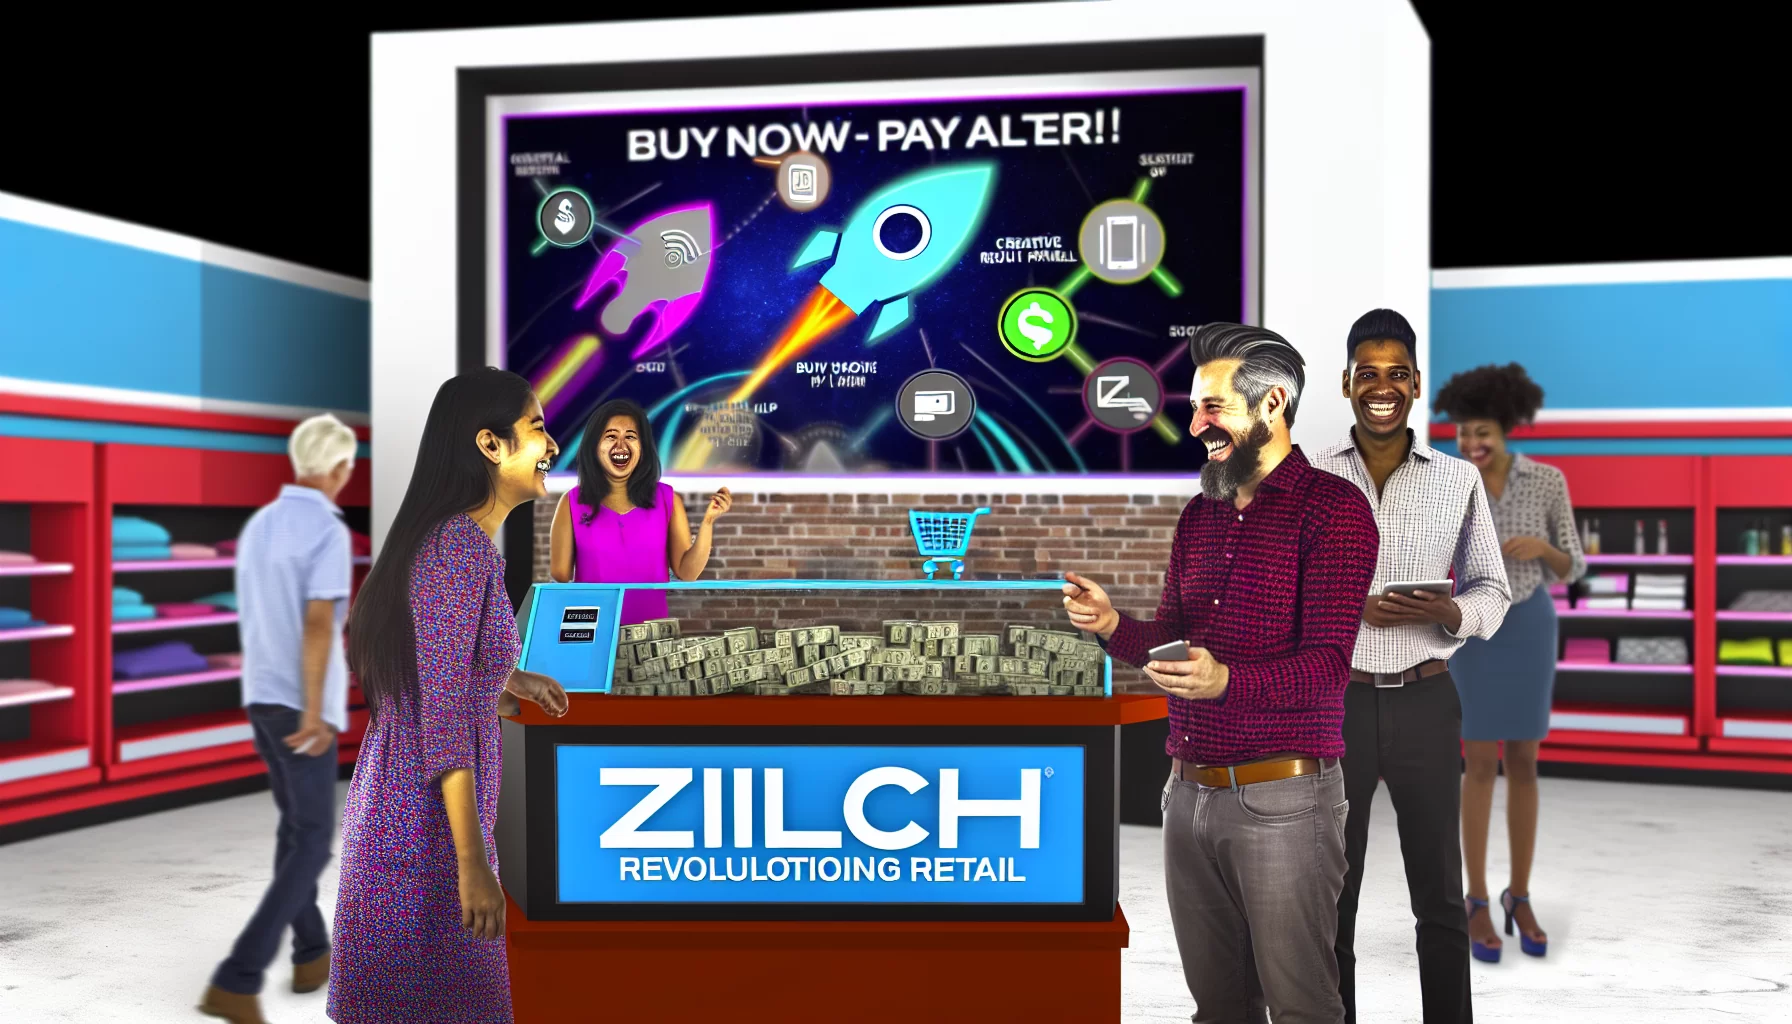 Zilch revolutionizes retail with innovative BNPL services and potential IPO